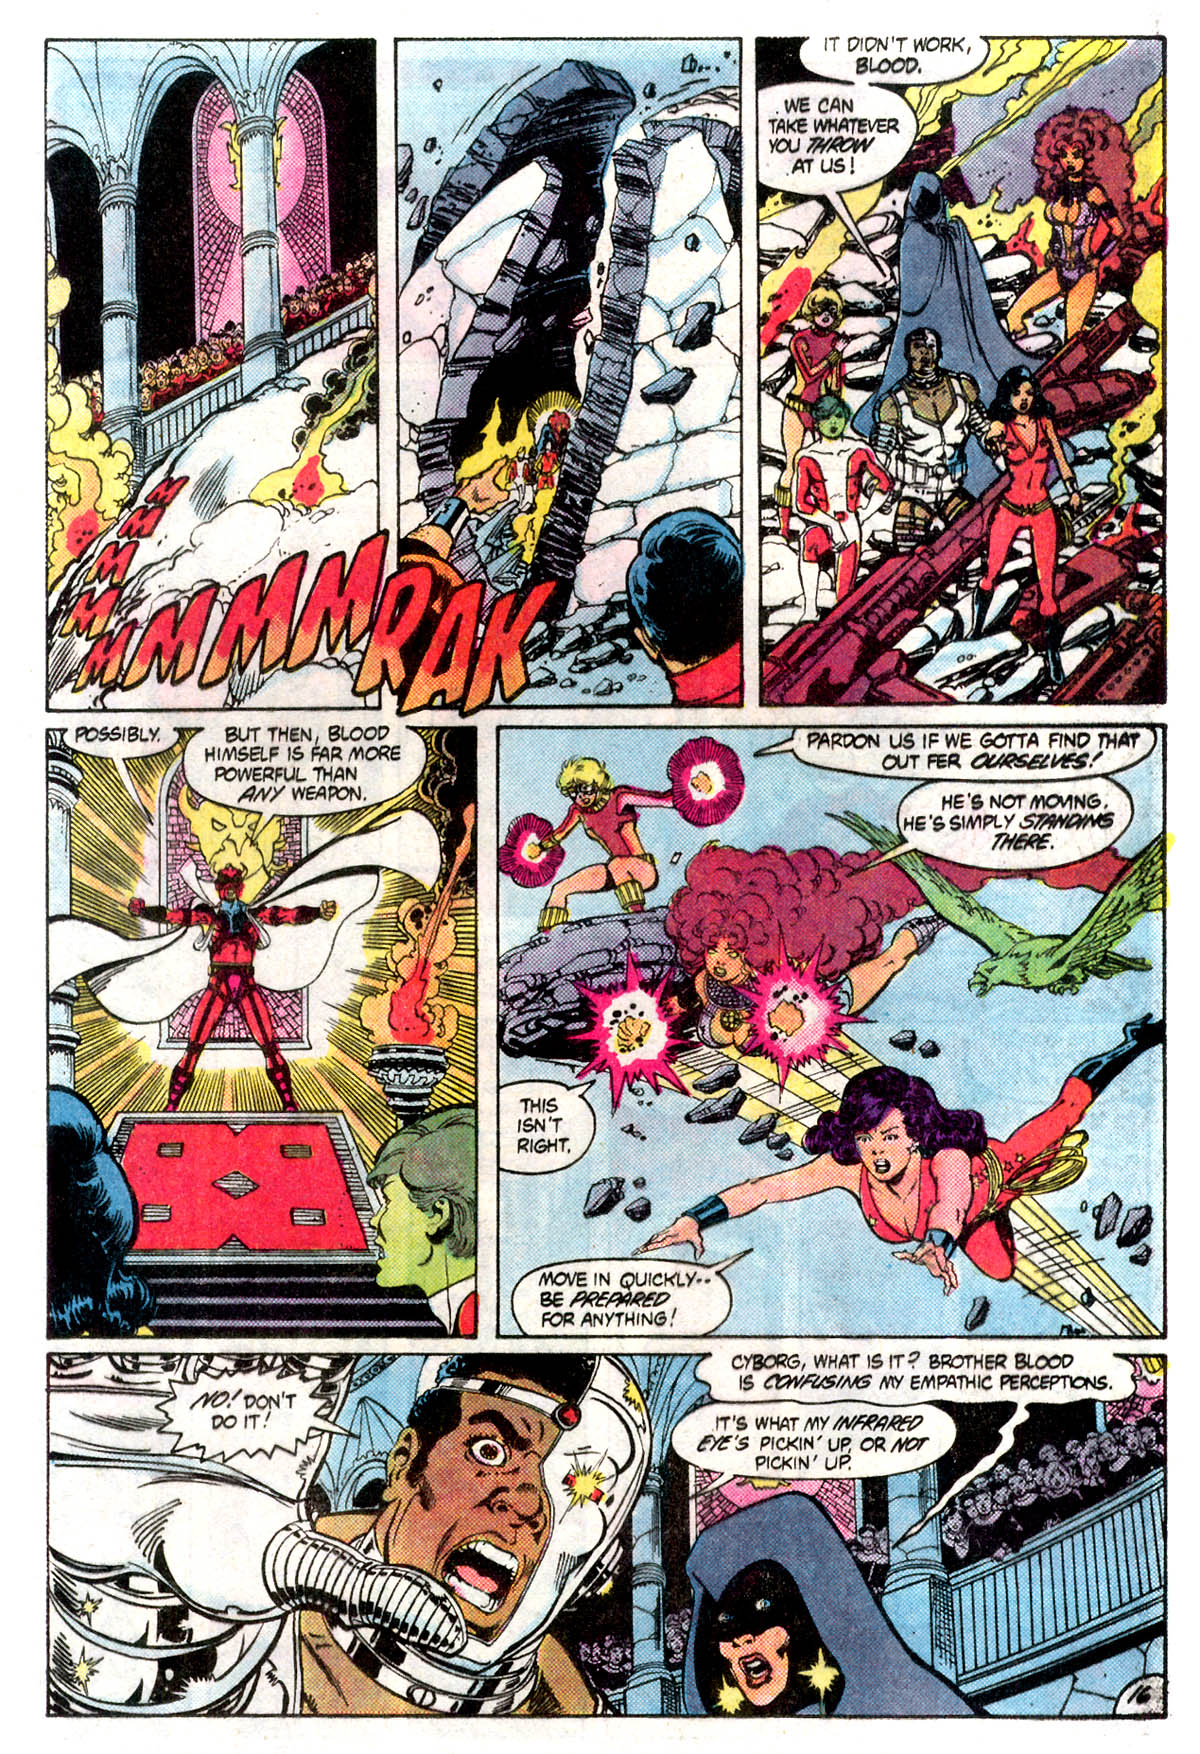 Tales of the Teen Titans Issue #41 #2 - English 17